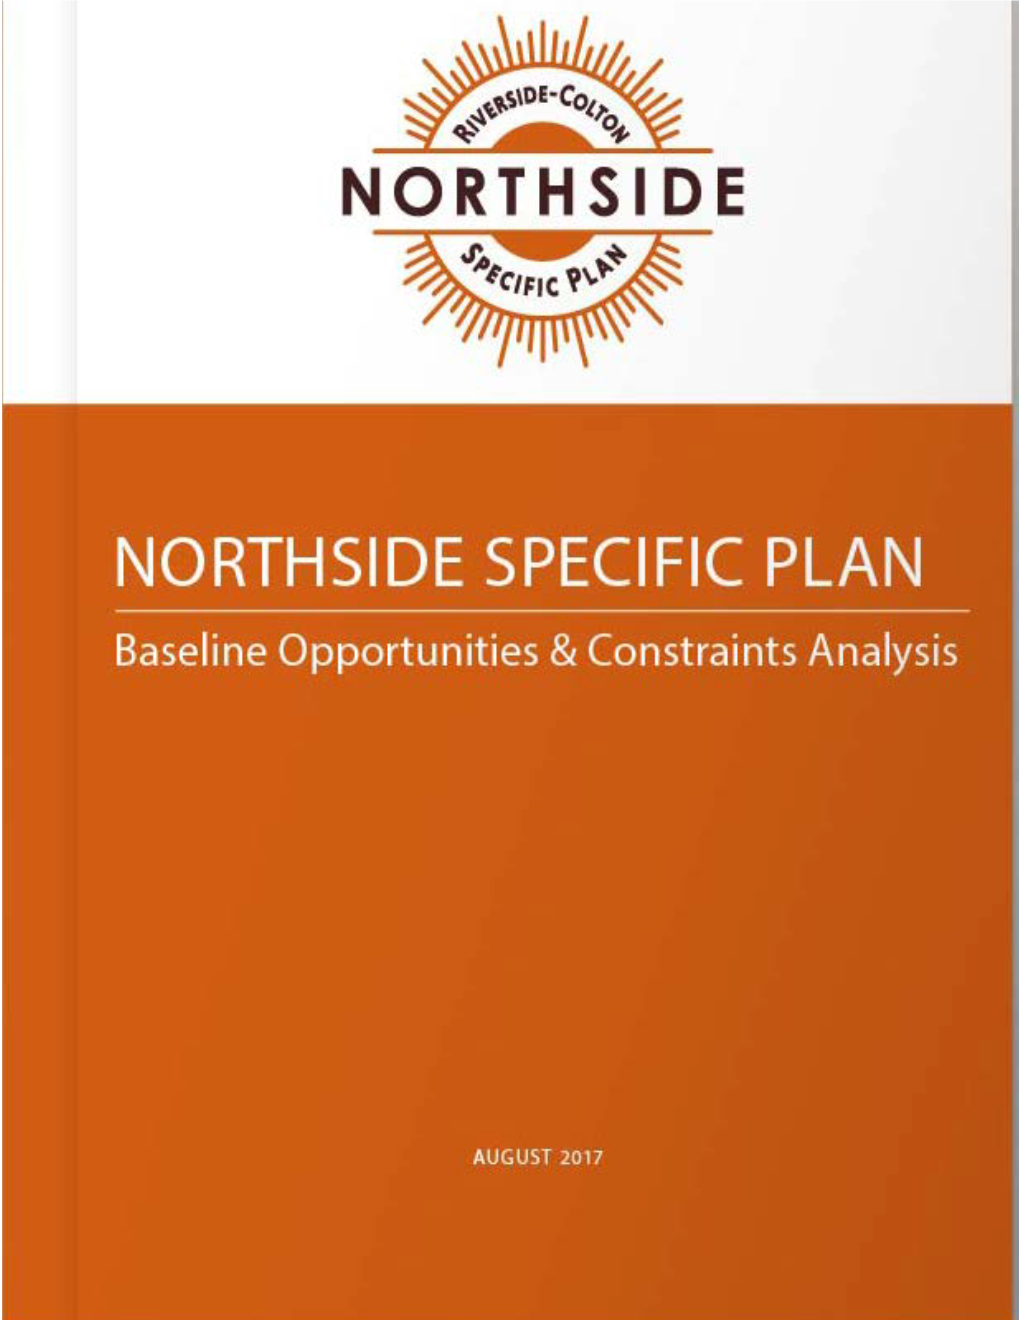 Baseline Opportunities & Constraints Analysis